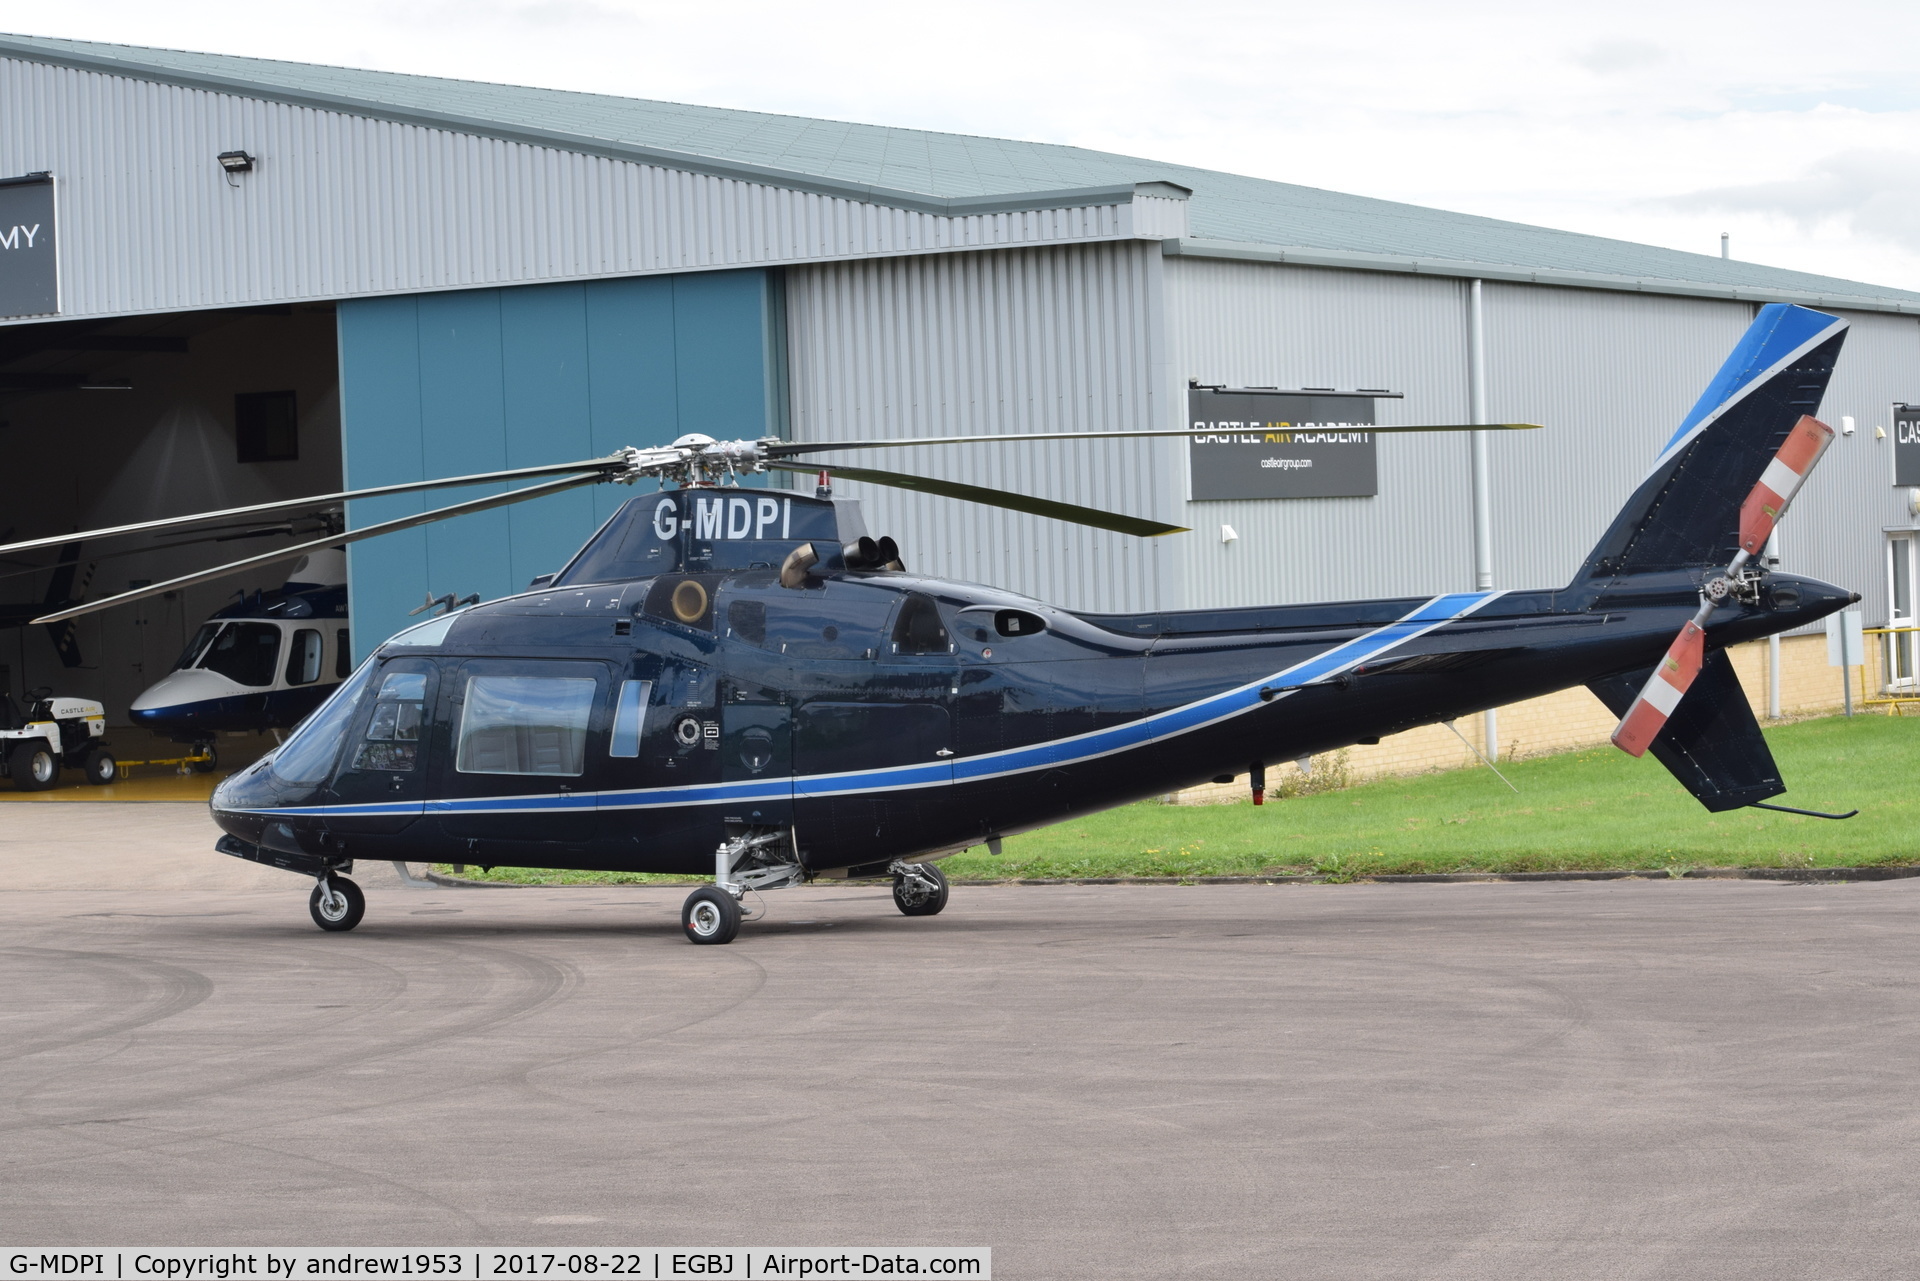 G-MDPI, 1987 Agusta A-109A-2 C/N 7393, G-MDPI at Gloucestershire Airport.